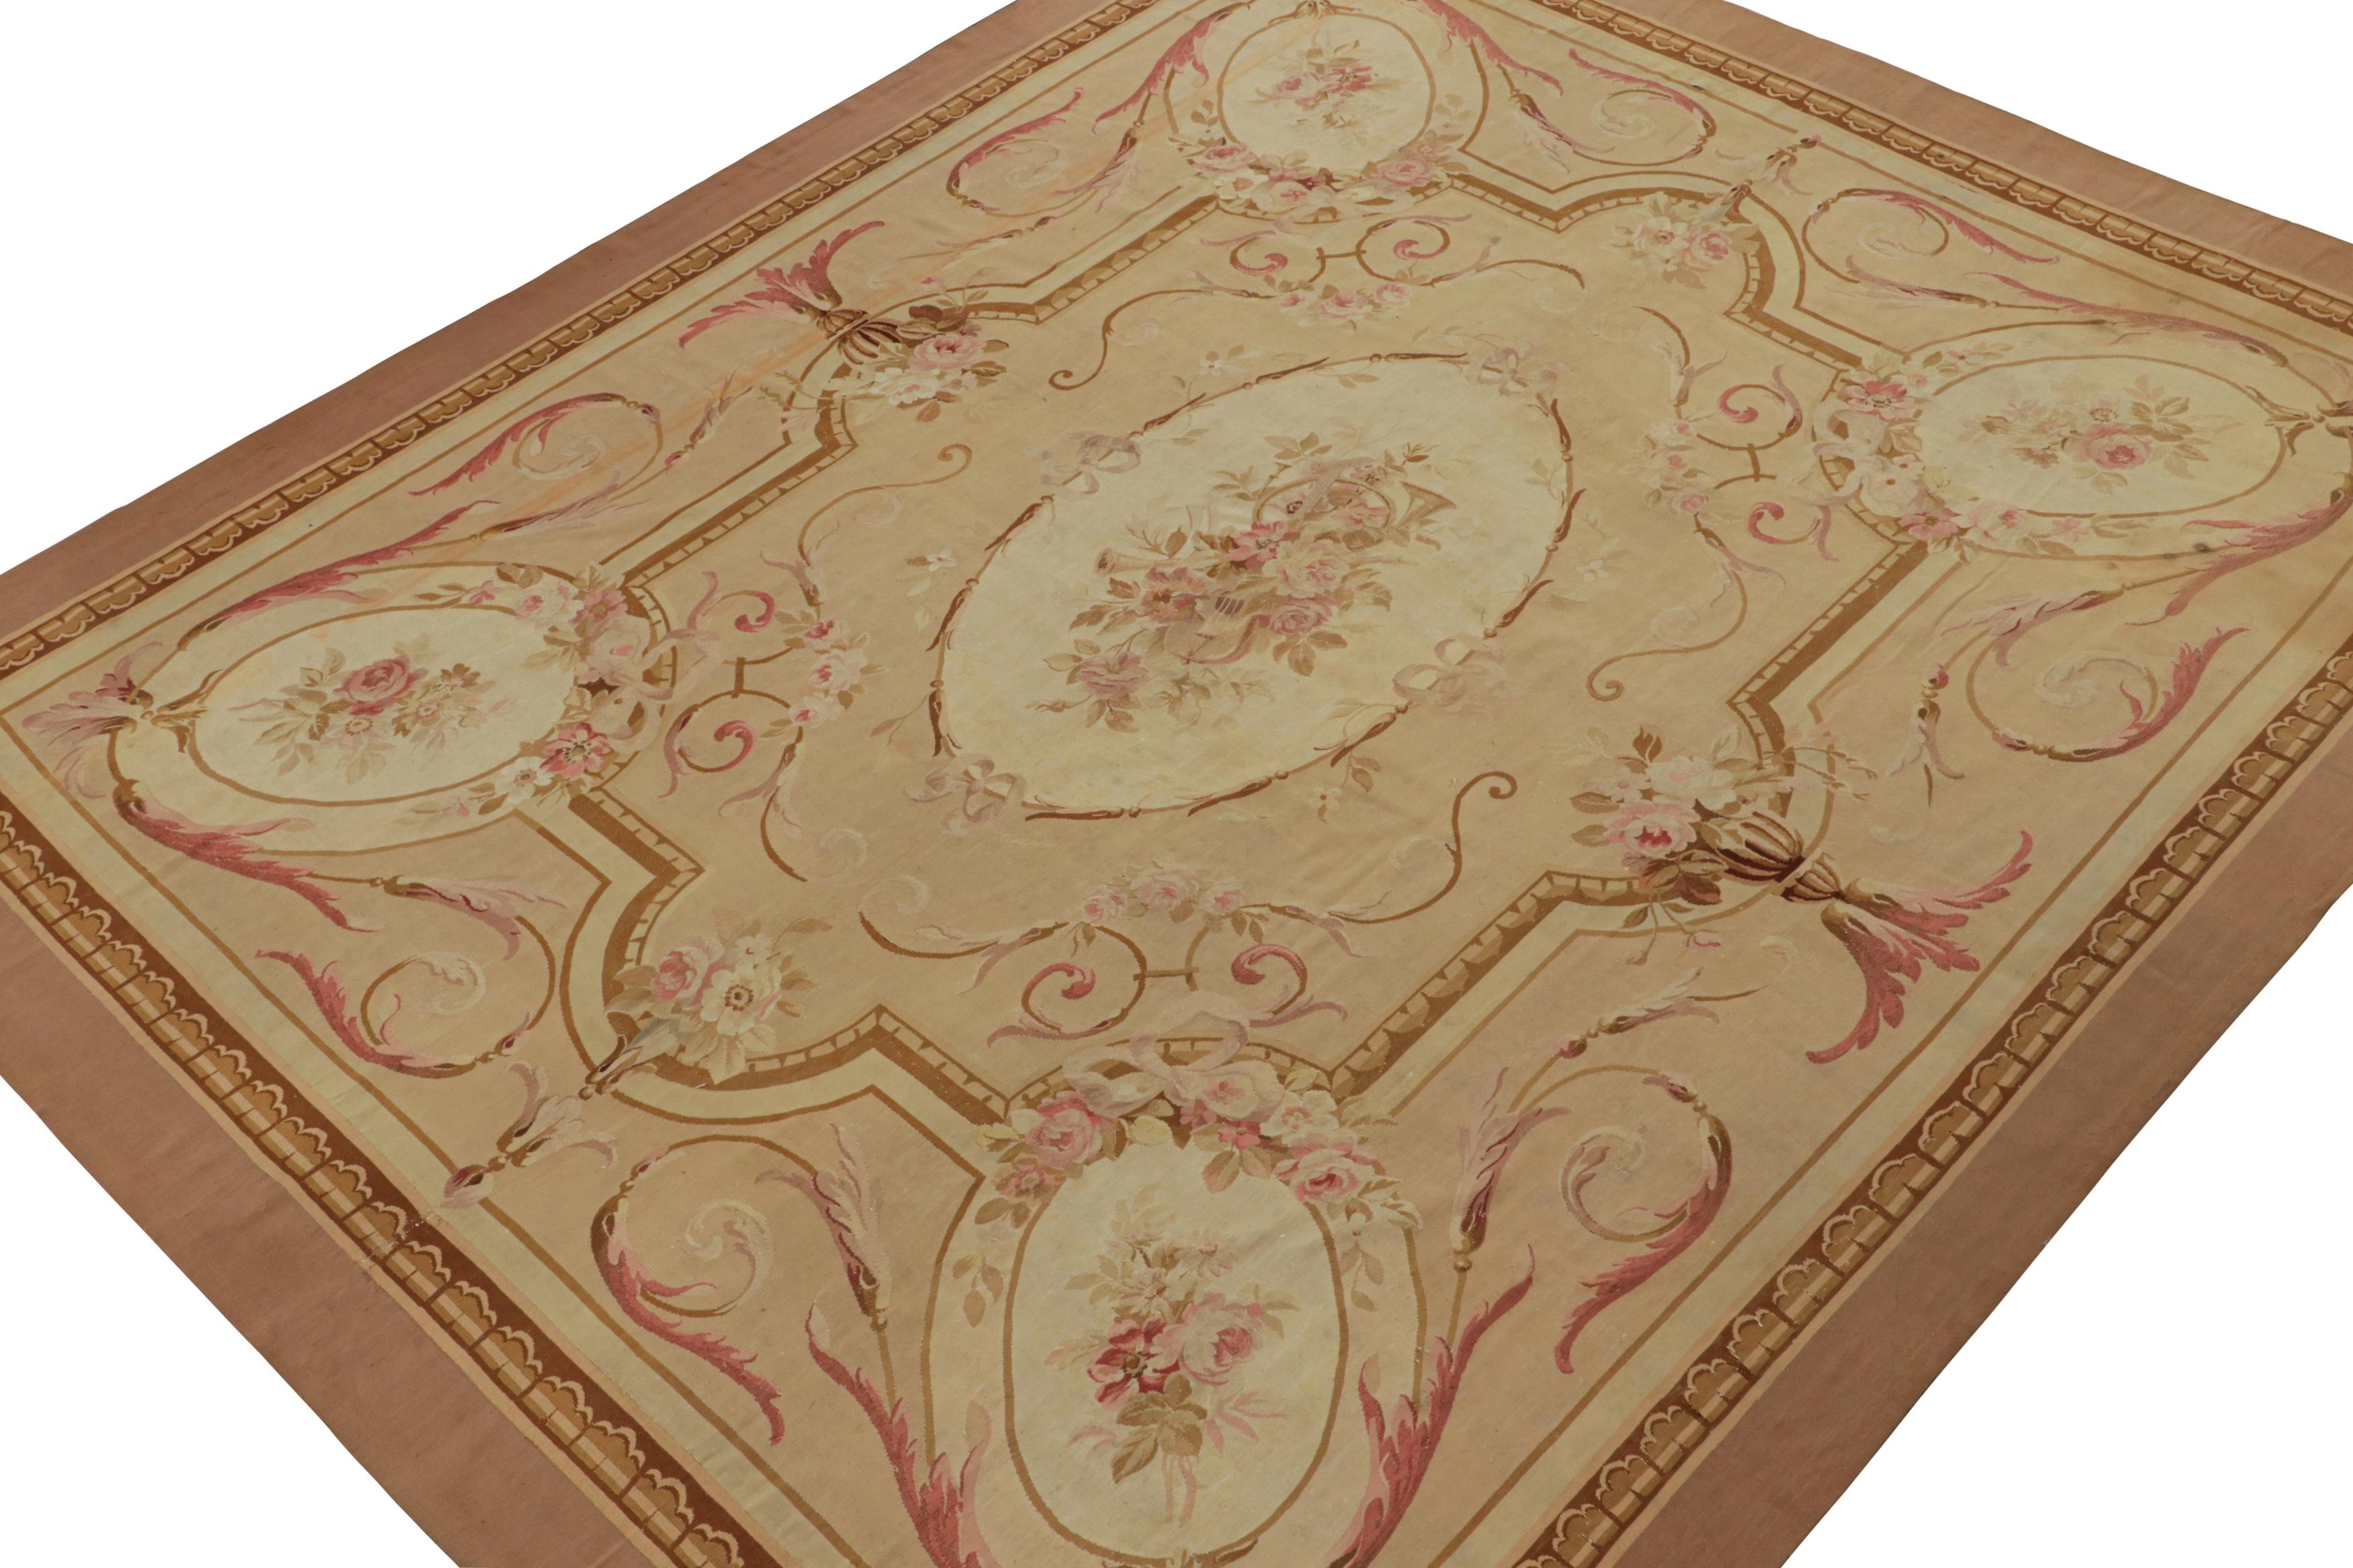 Handwoven in wool circa 1890-1900, this 10x11 antique Aubusson flatweave rug enjoys beige and pink tones with finely detailed cartouches and floral patterns in the transitional French tapestry weave style. 

On the Design: 

Admirers of Aubusson